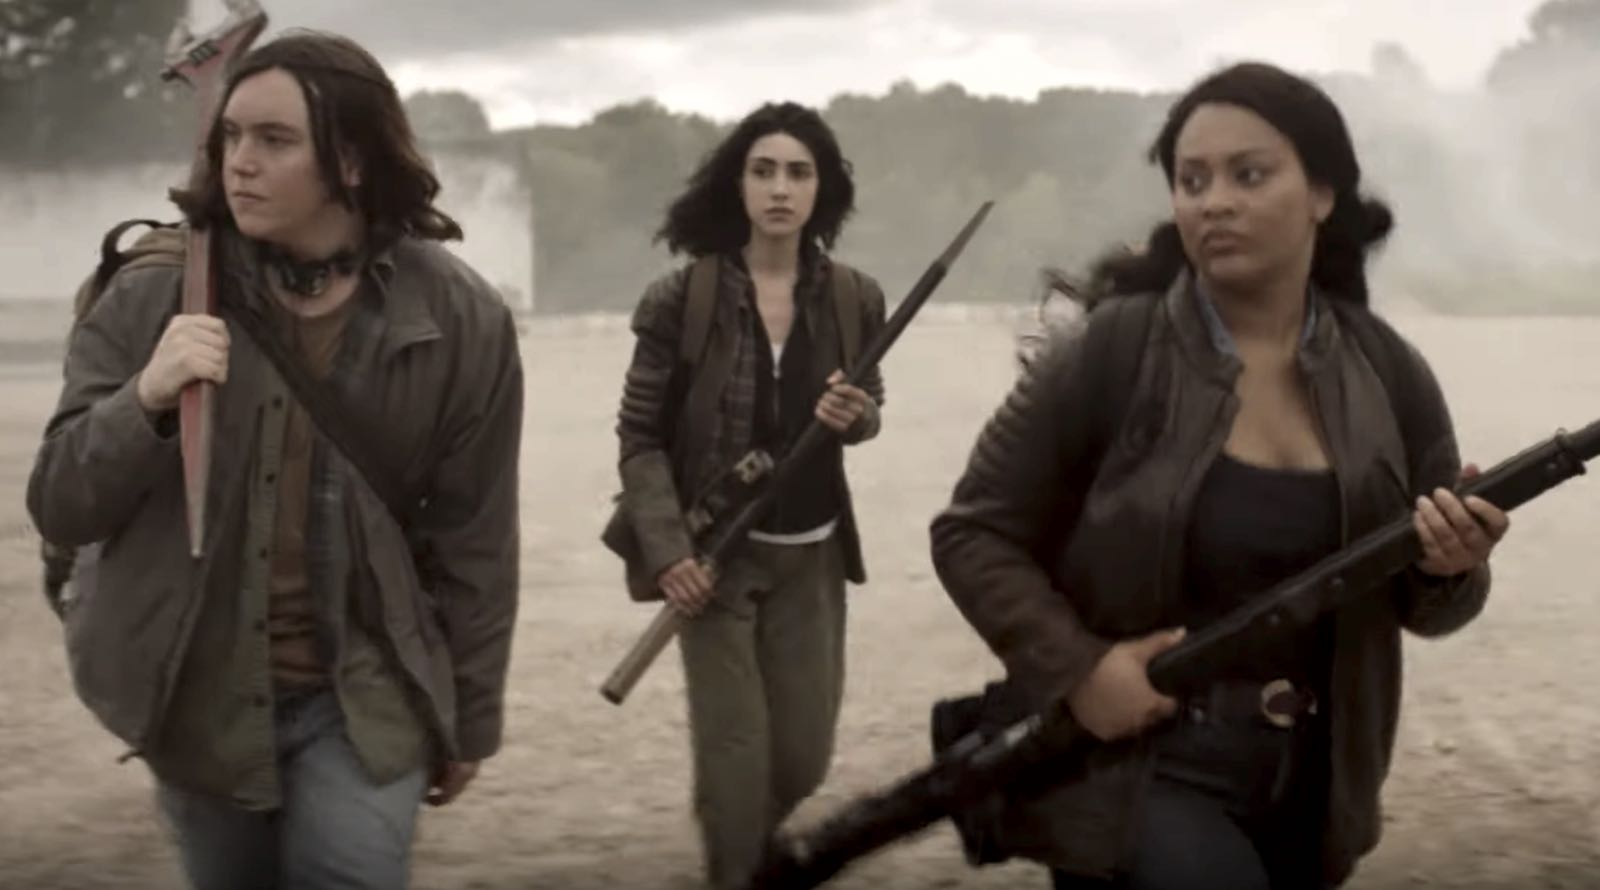 Trailer Drops for New 'Walking Dead' Series Coming to AMC in 2020 ...